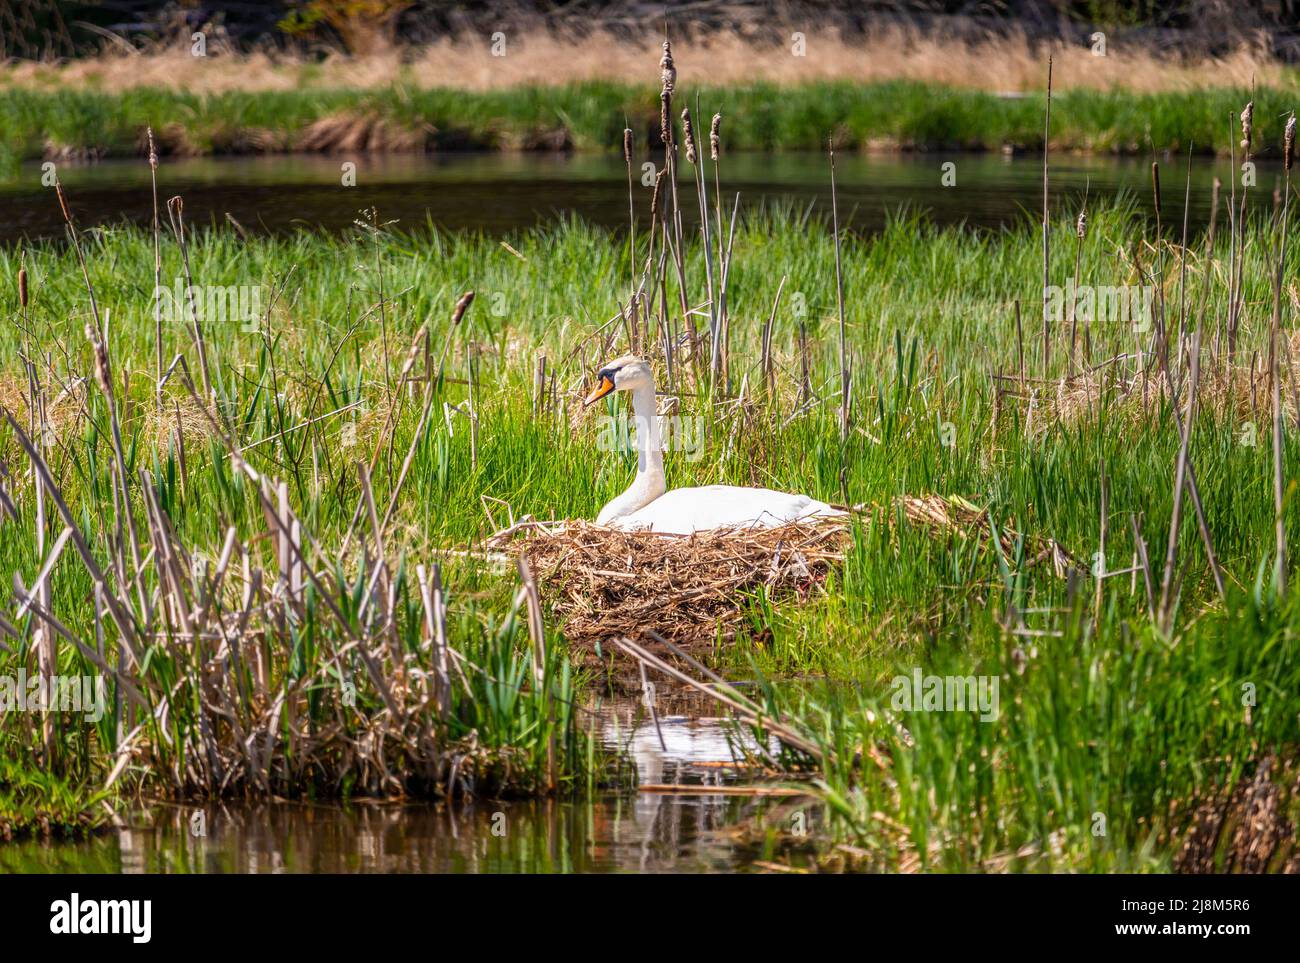 white swan sitting in a nest in reeds on the bank of a pond, sunny day Stock Photo